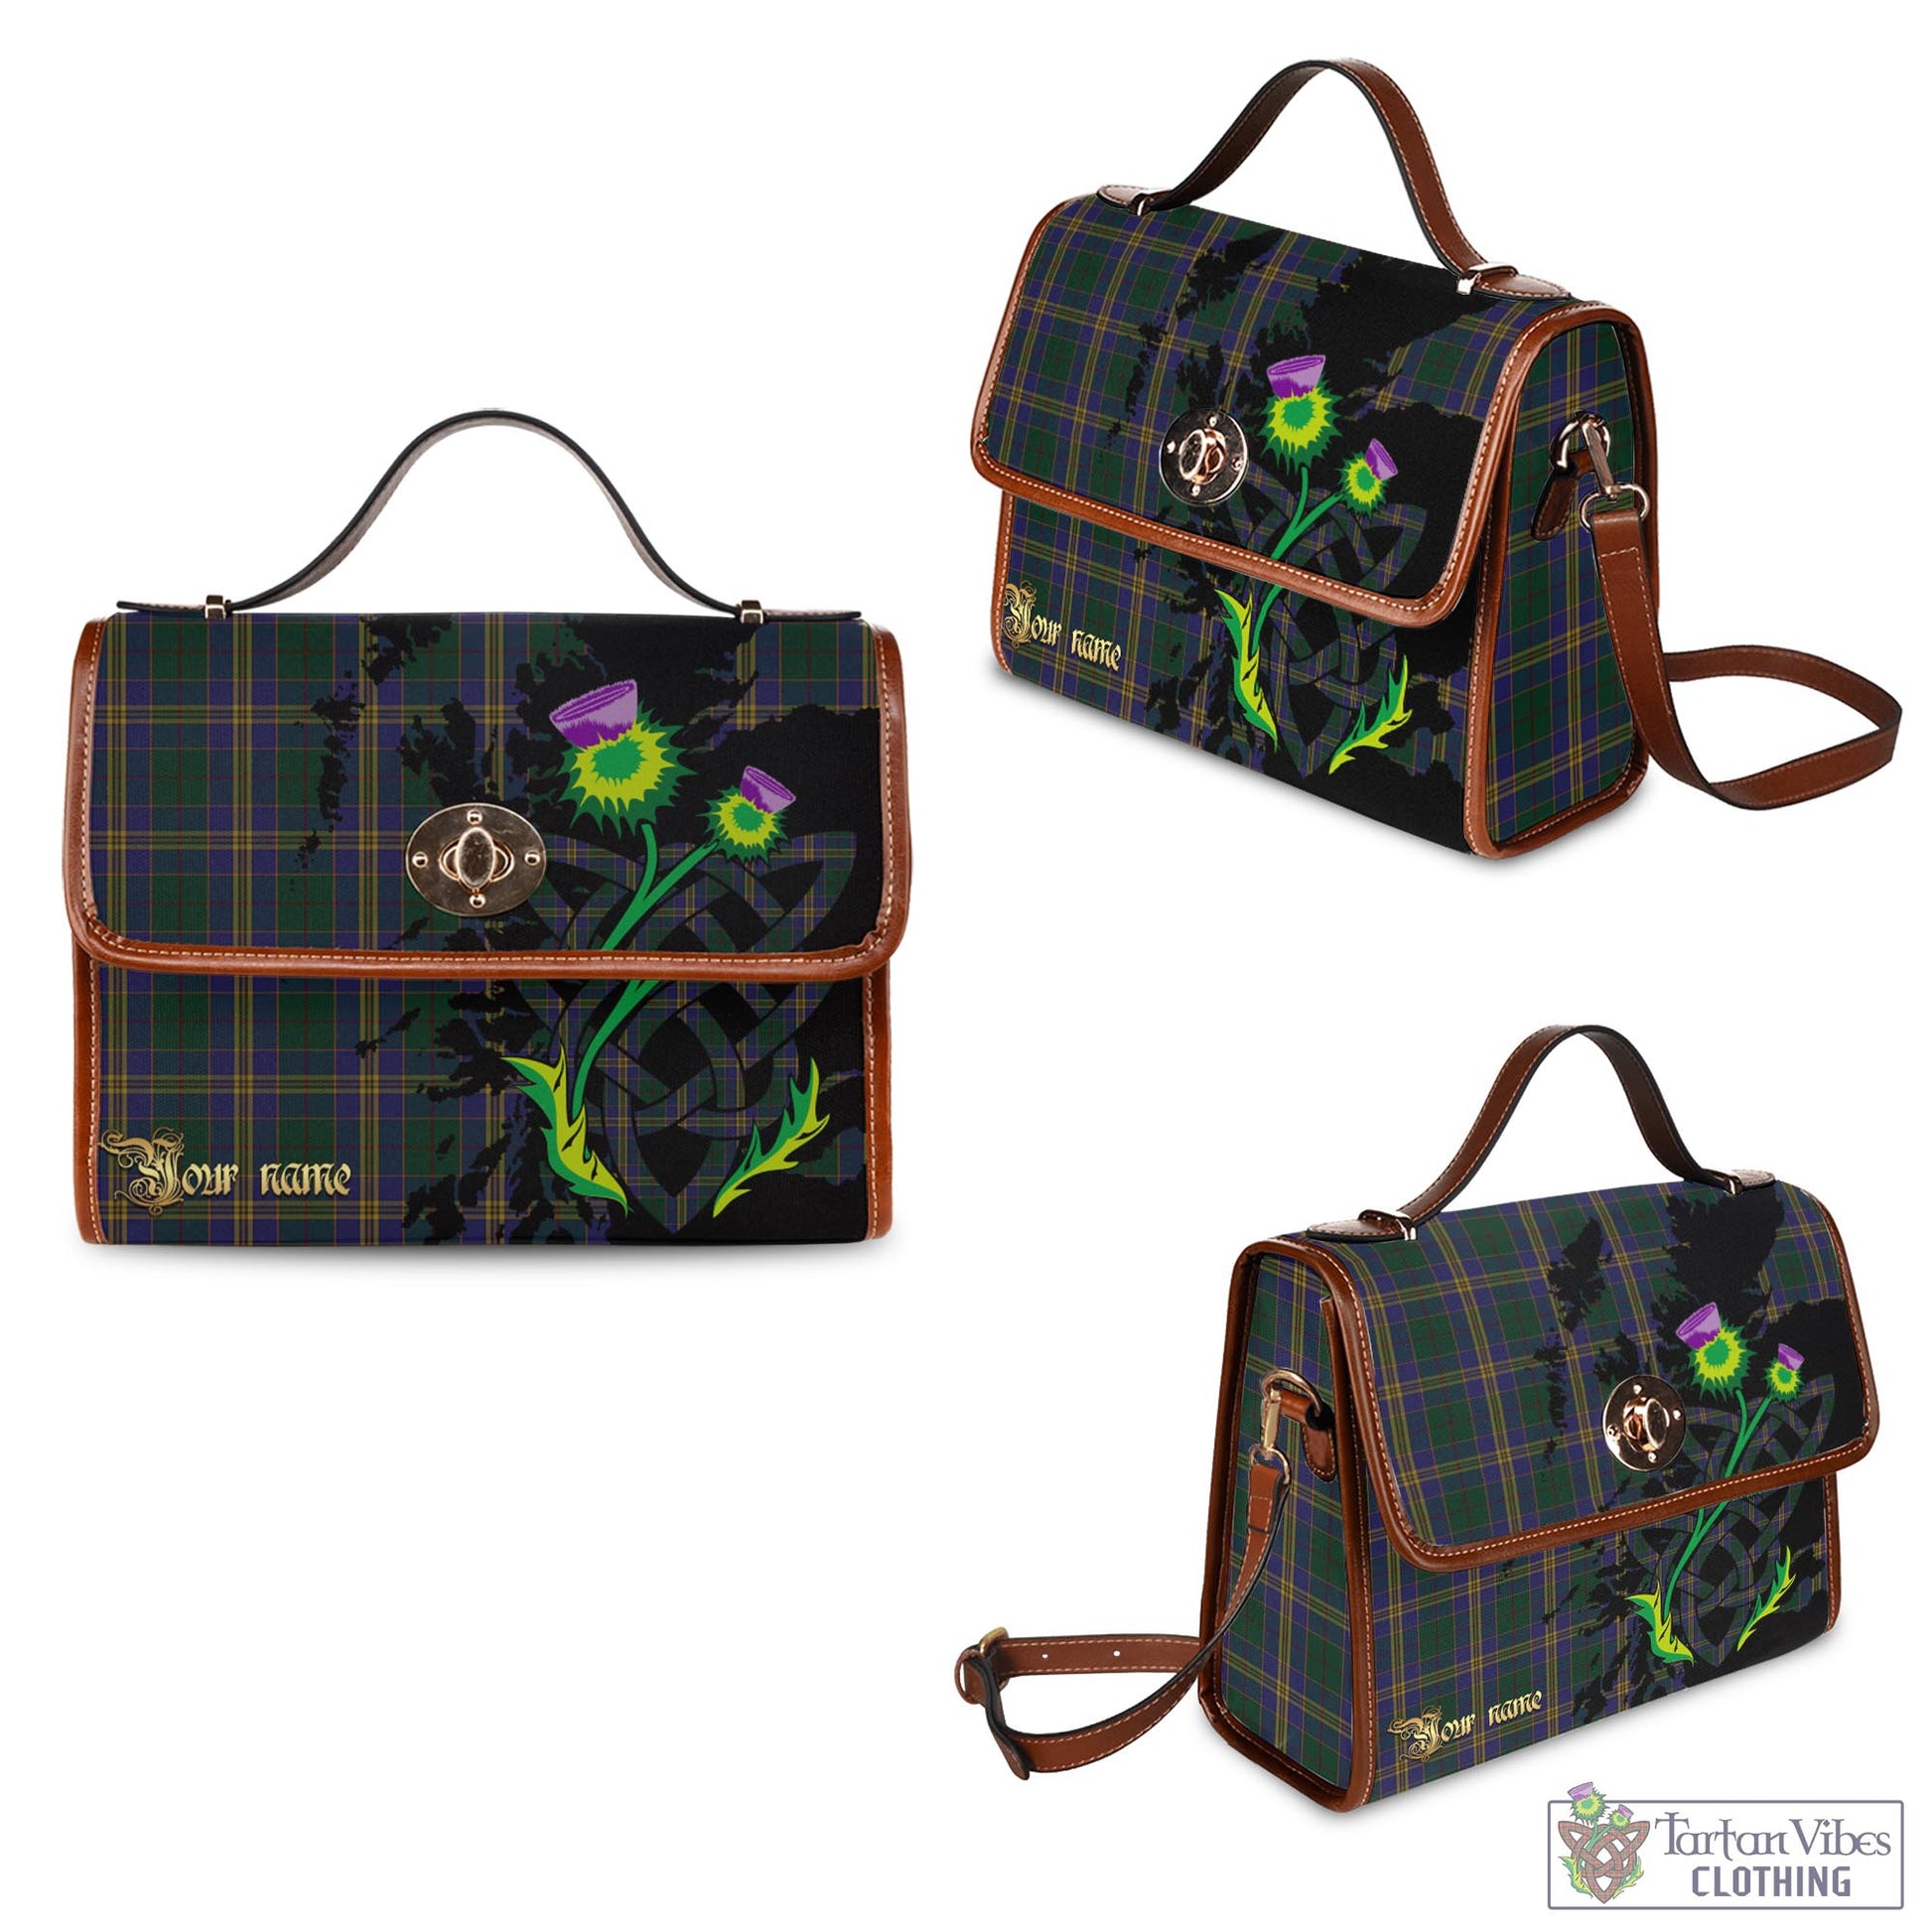 Tartan Vibes Clothing Kilkenny County Ireland Tartan Waterproof Canvas Bag with Scotland Map and Thistle Celtic Accents